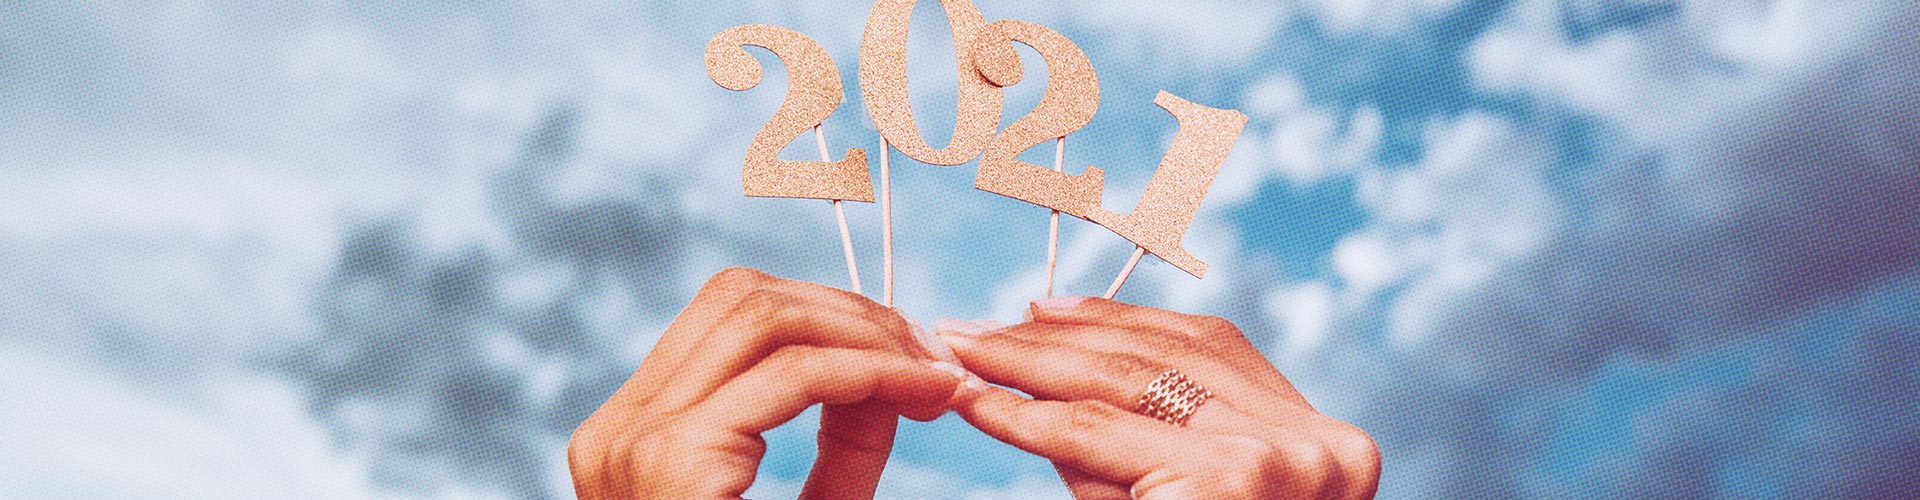 20 New Trends blog banner featuring hands holding glittery 2021 paper numbers